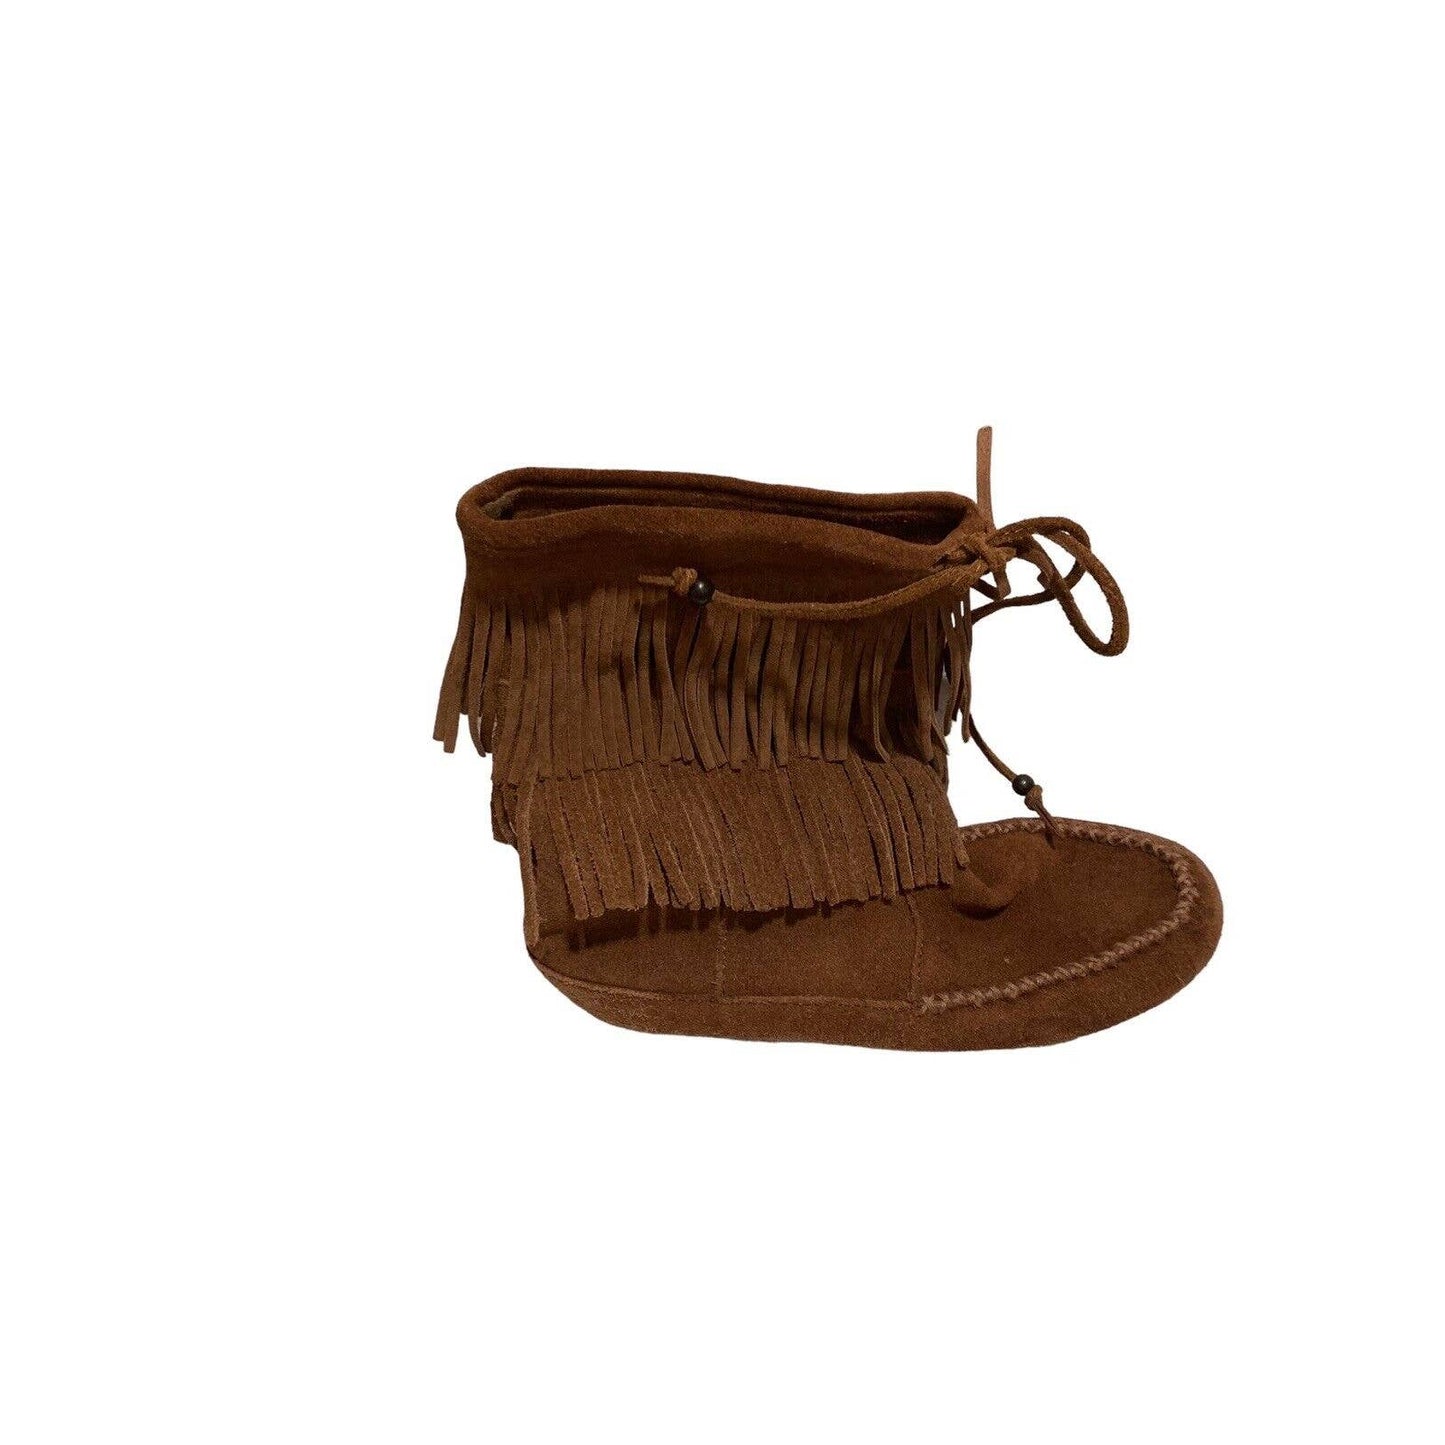 Minnetonka Boots Fringe Mid Calf Camel Leather Suede Round Moc Toe Tie Size 6.5